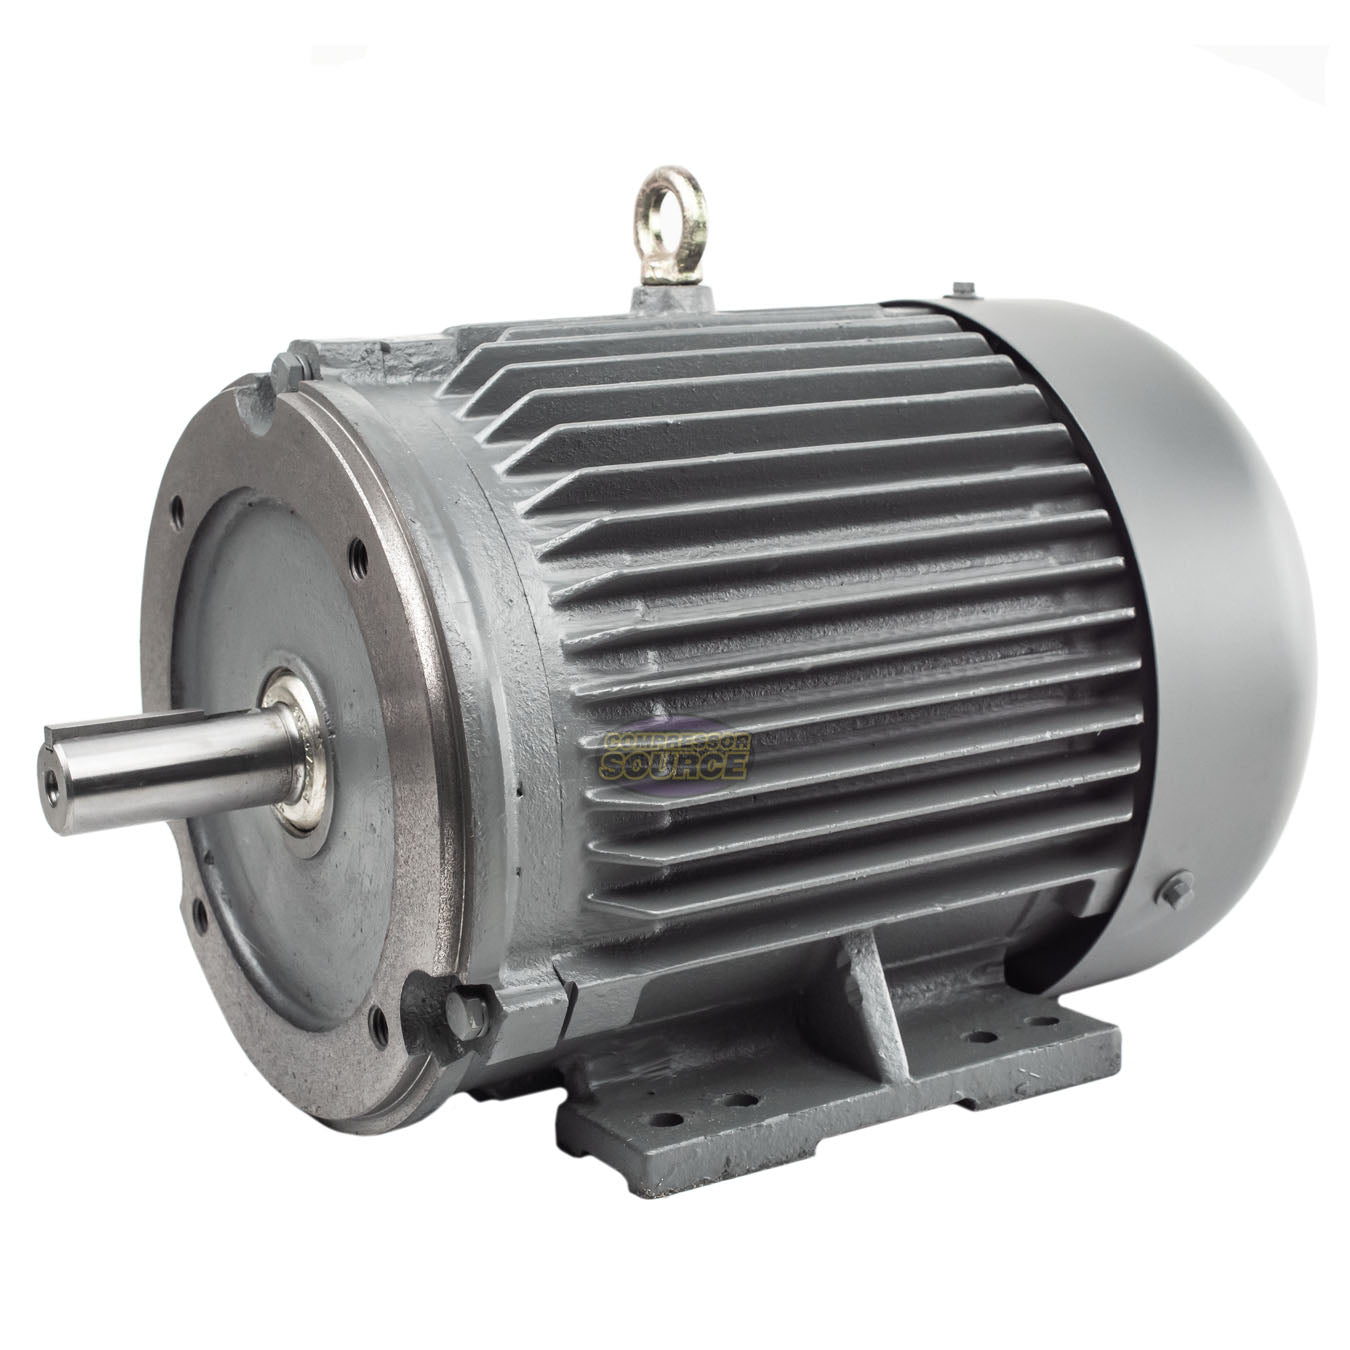 5 HP 3 Phase Electric Motor C-Face 3600 RPM 184TC TEFC 230/460 Volt Severe Duty